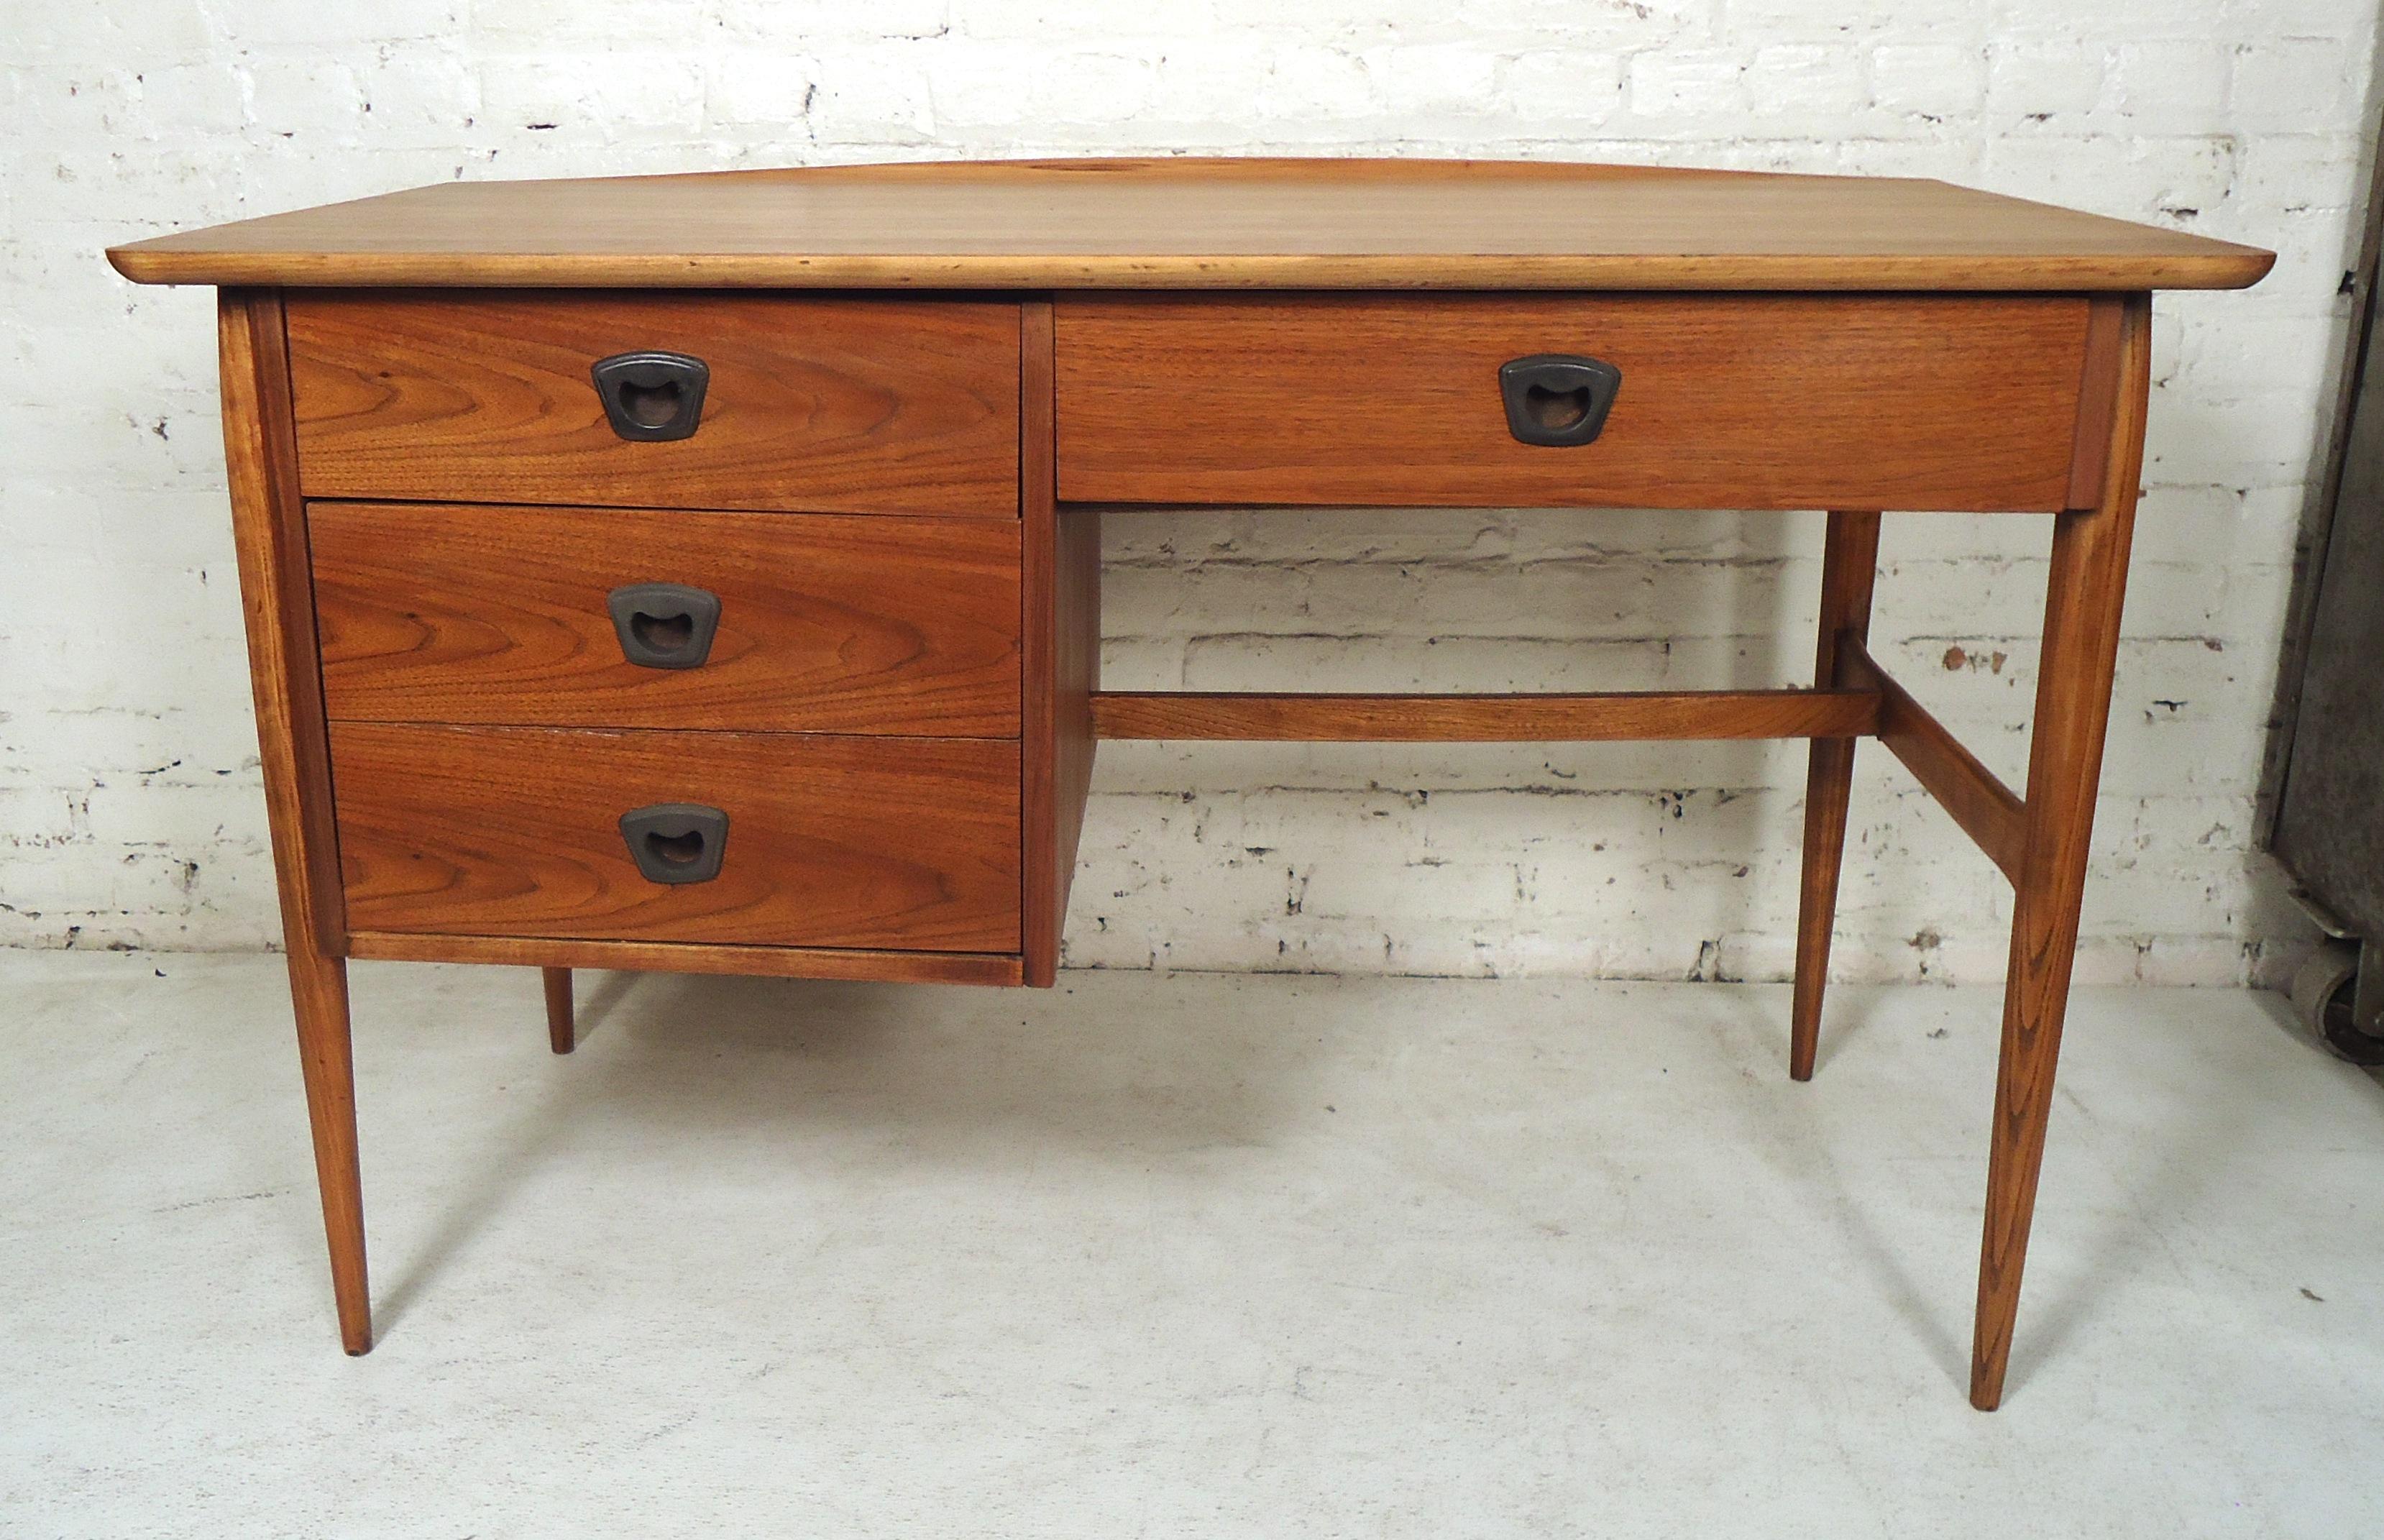 Bassett Furniture vintage American desk with walnut grain and oak trim. Three drawers, sculpted legs and curved top.

(Please confirm item location - NY or NJ - with dealer).